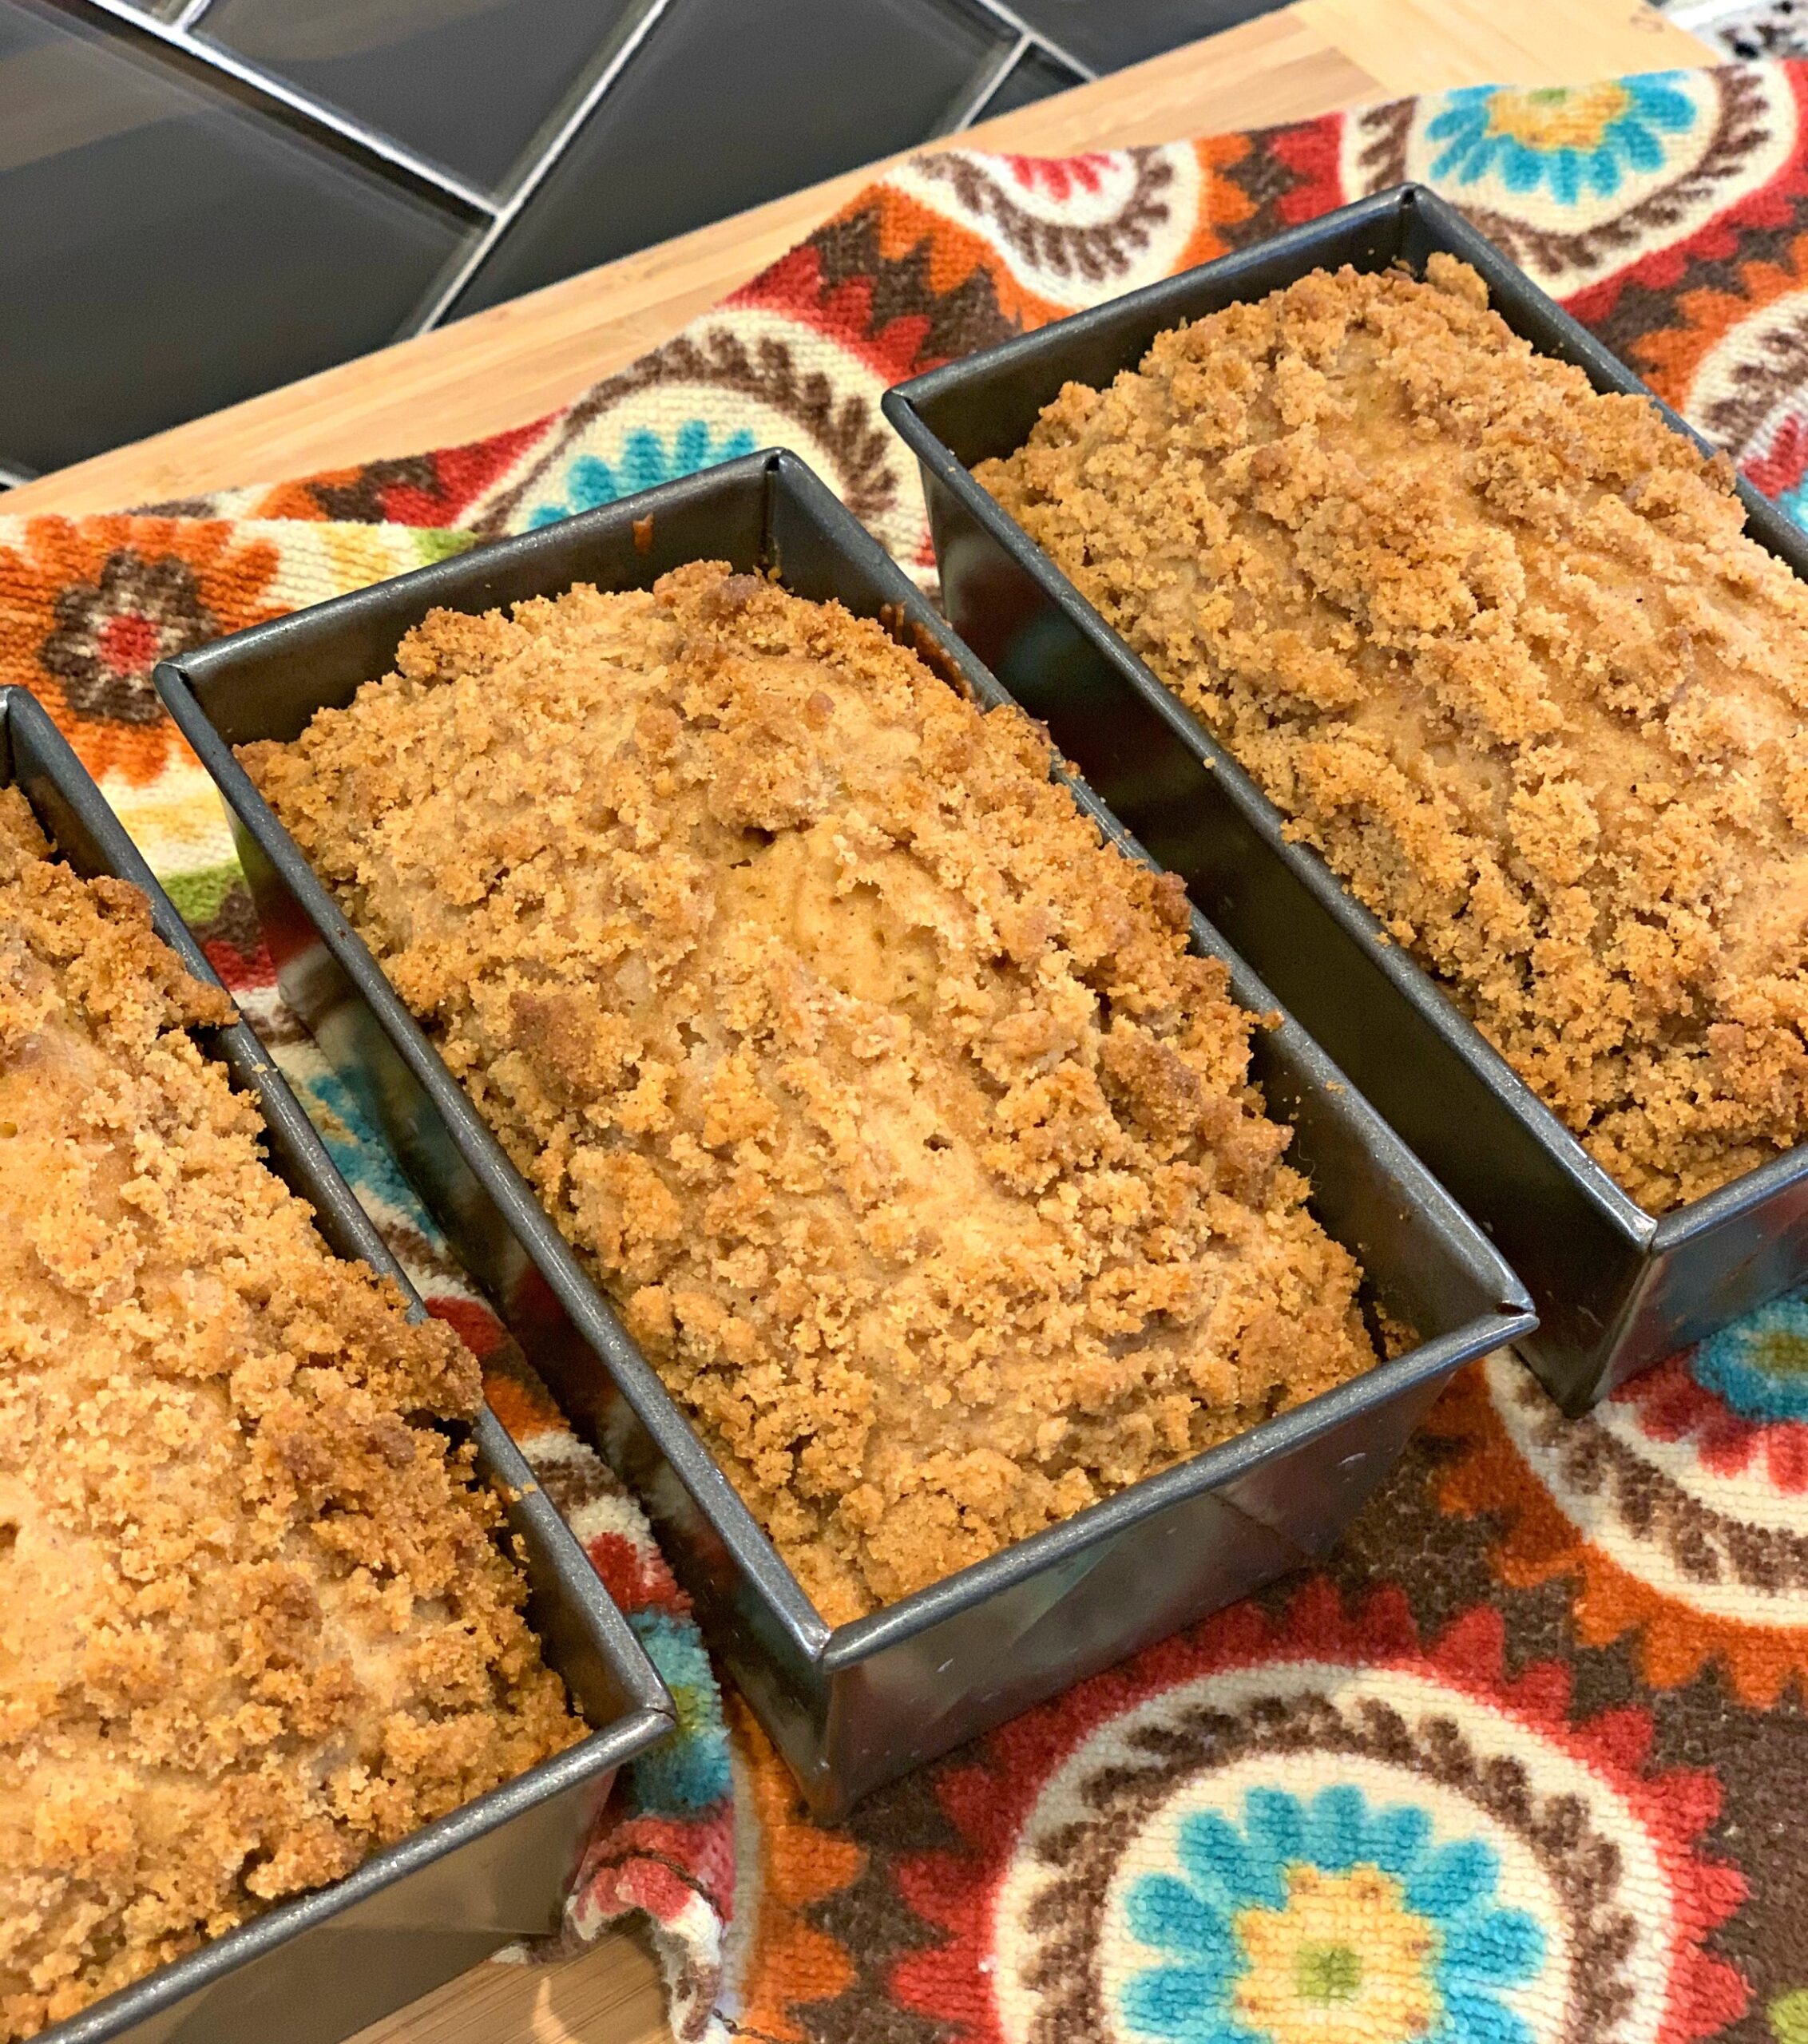 cinnamon crumble topped banana bread in mini loaf pans.